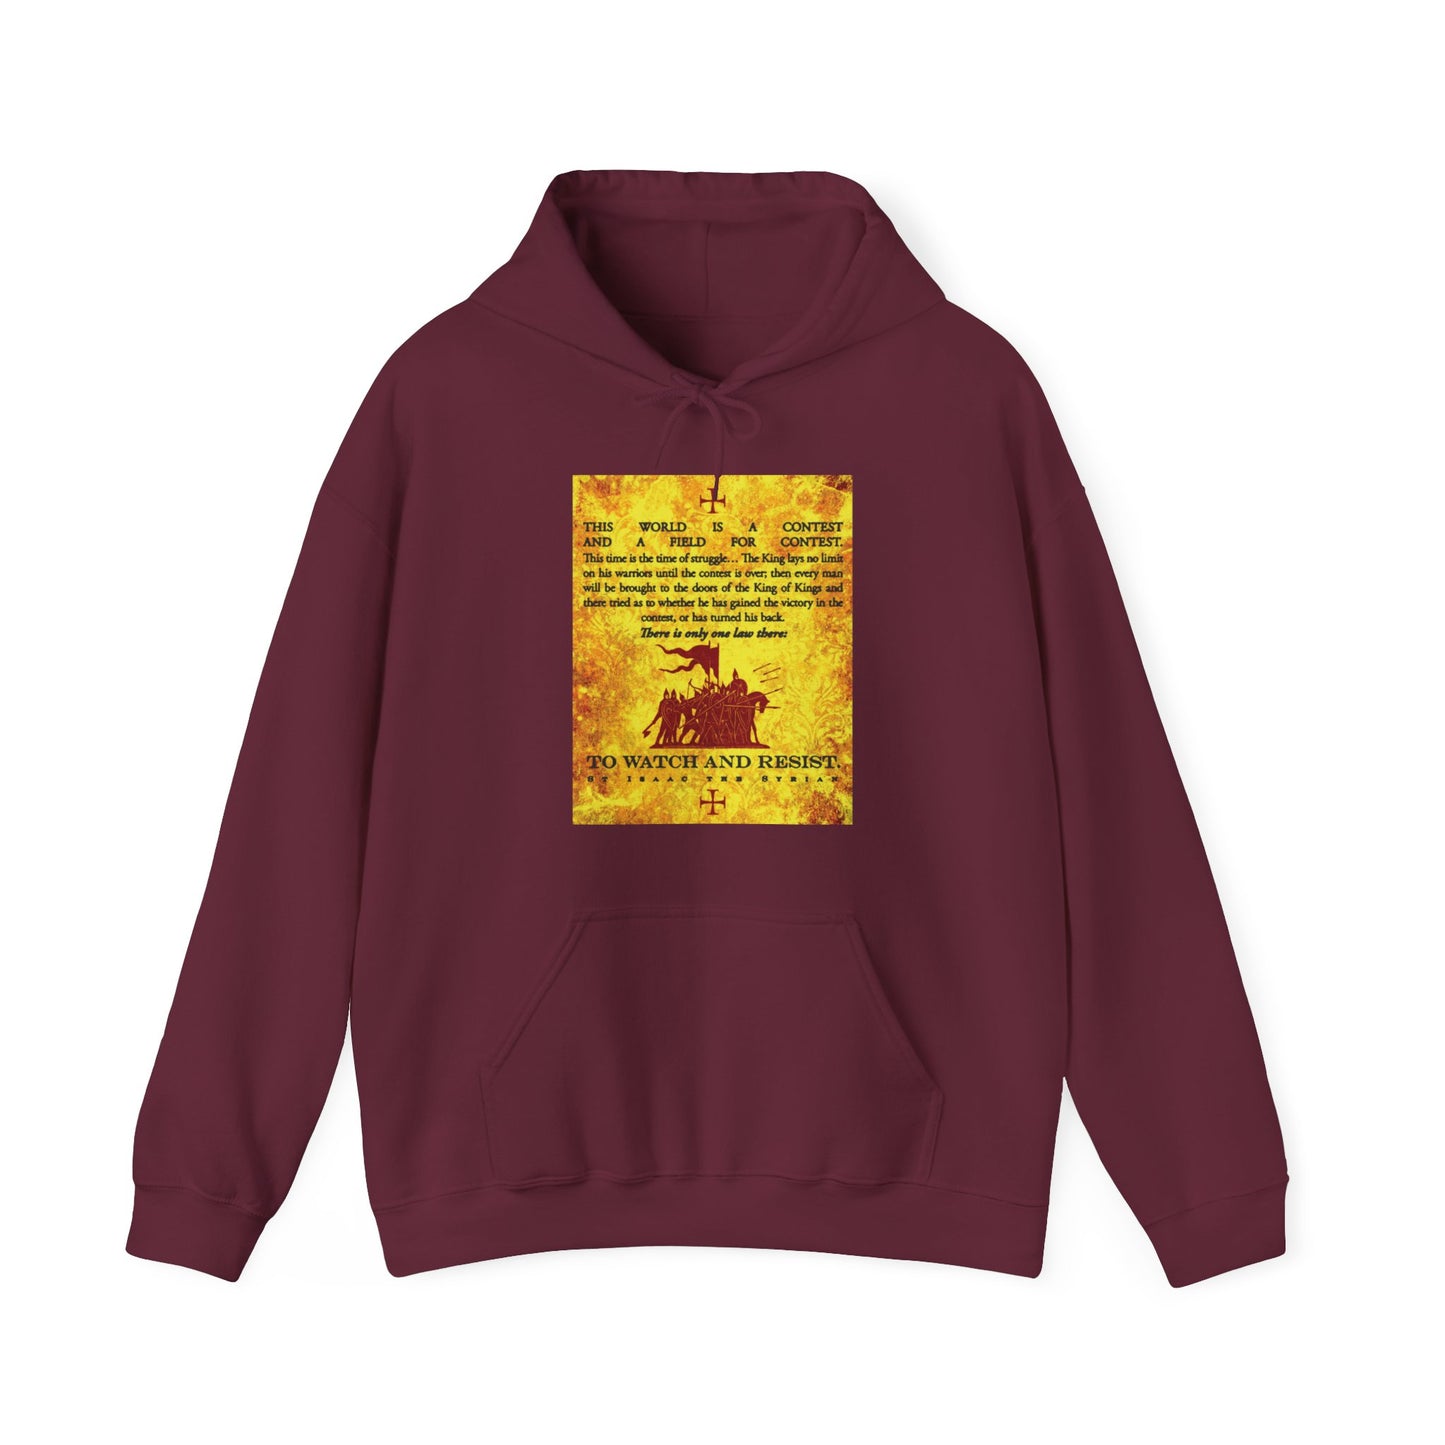 The World is a Contest No. 1 (St Isaac the Syrian) | Orthodox Christian Hoodie / Hooded Sweatshirt